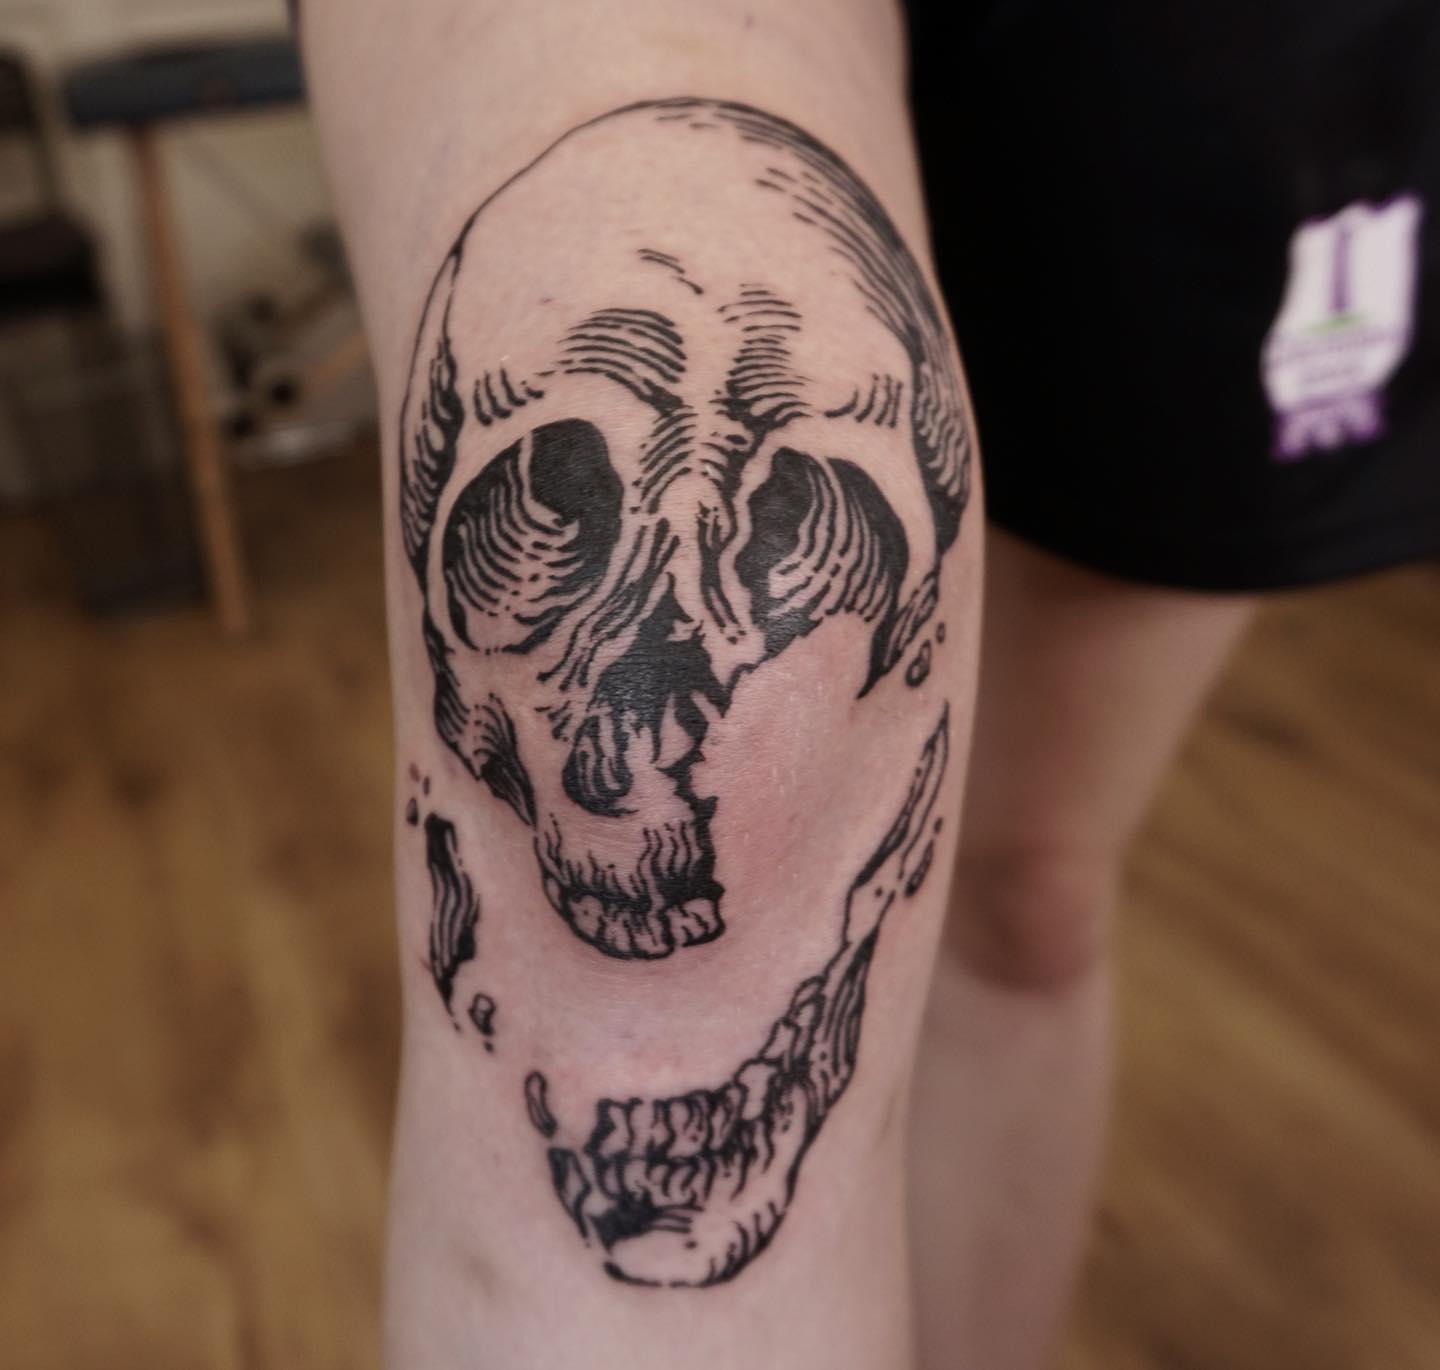 This knee tattoo is for those who like to look scary and mystical. Show that you’re a bold character who can and has overcome it all. You’ll look determined and as if nothing scares you with this skull tattoo.